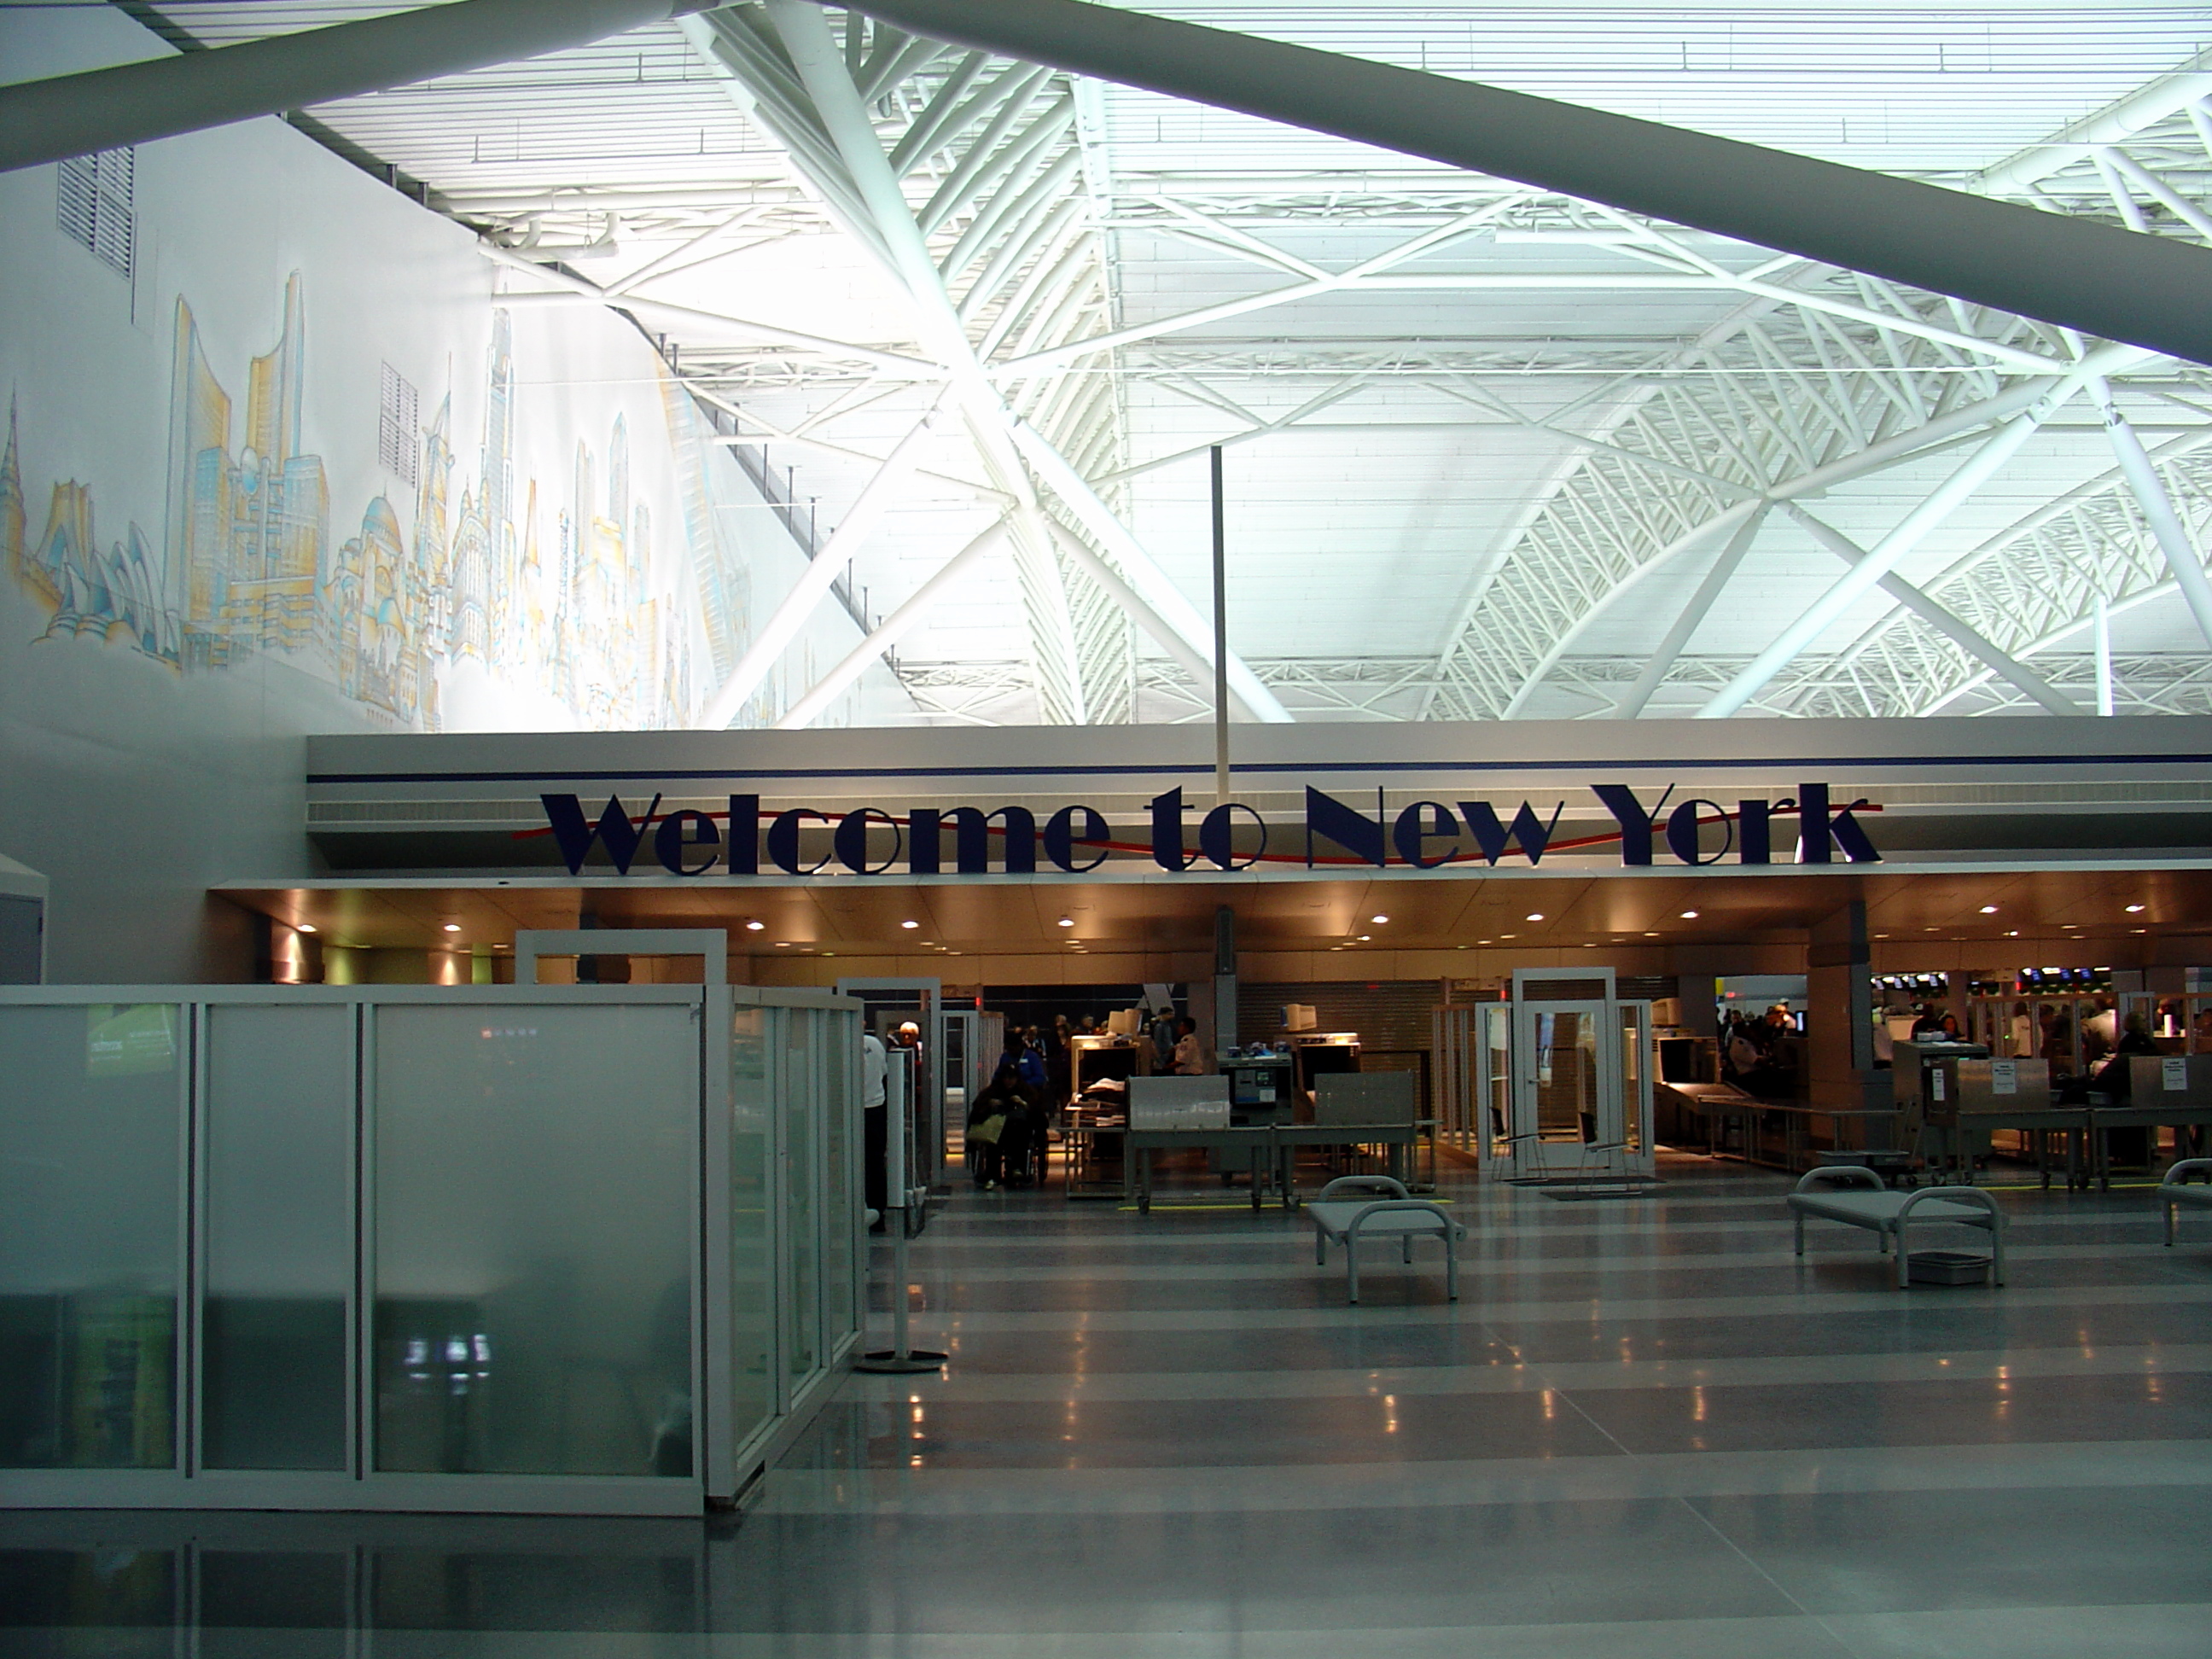 JFK terminal 9 - sign reading Welcome to New York